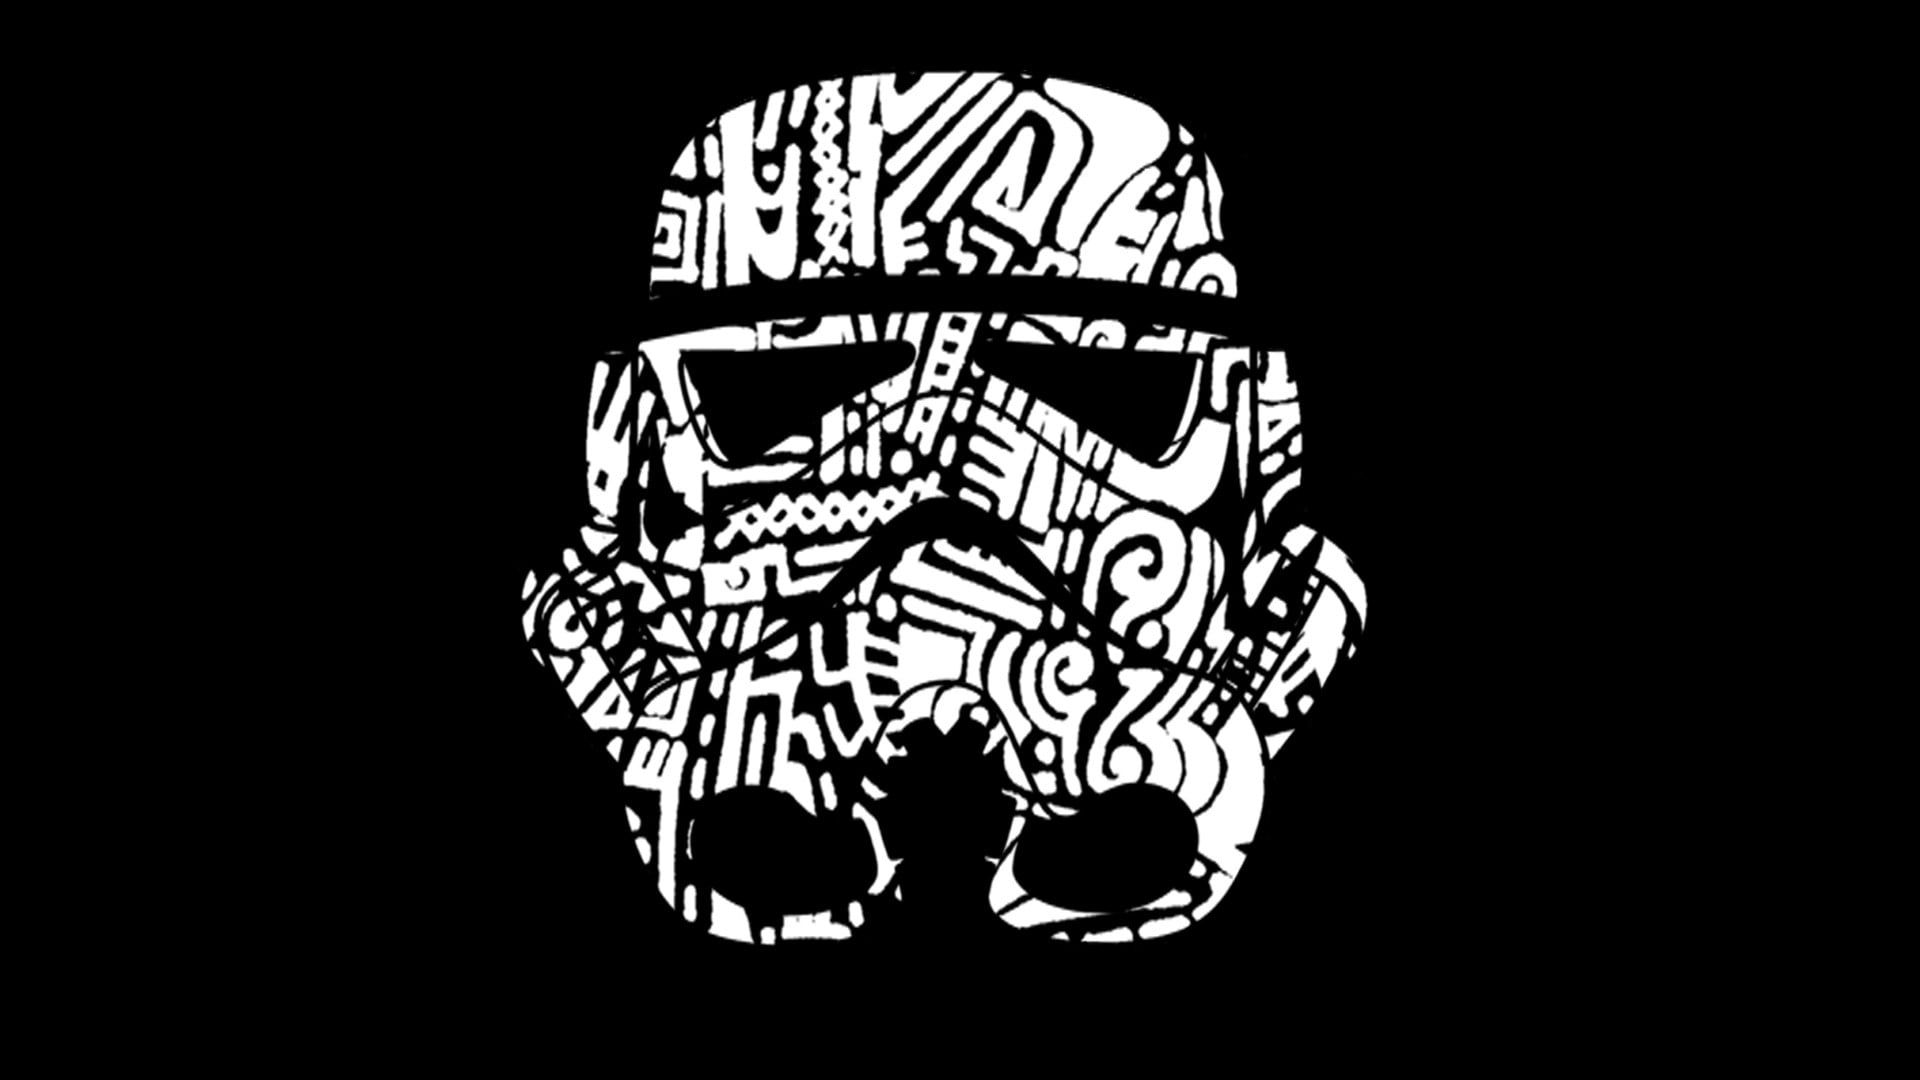 Star Wars Black And White Wallpapers